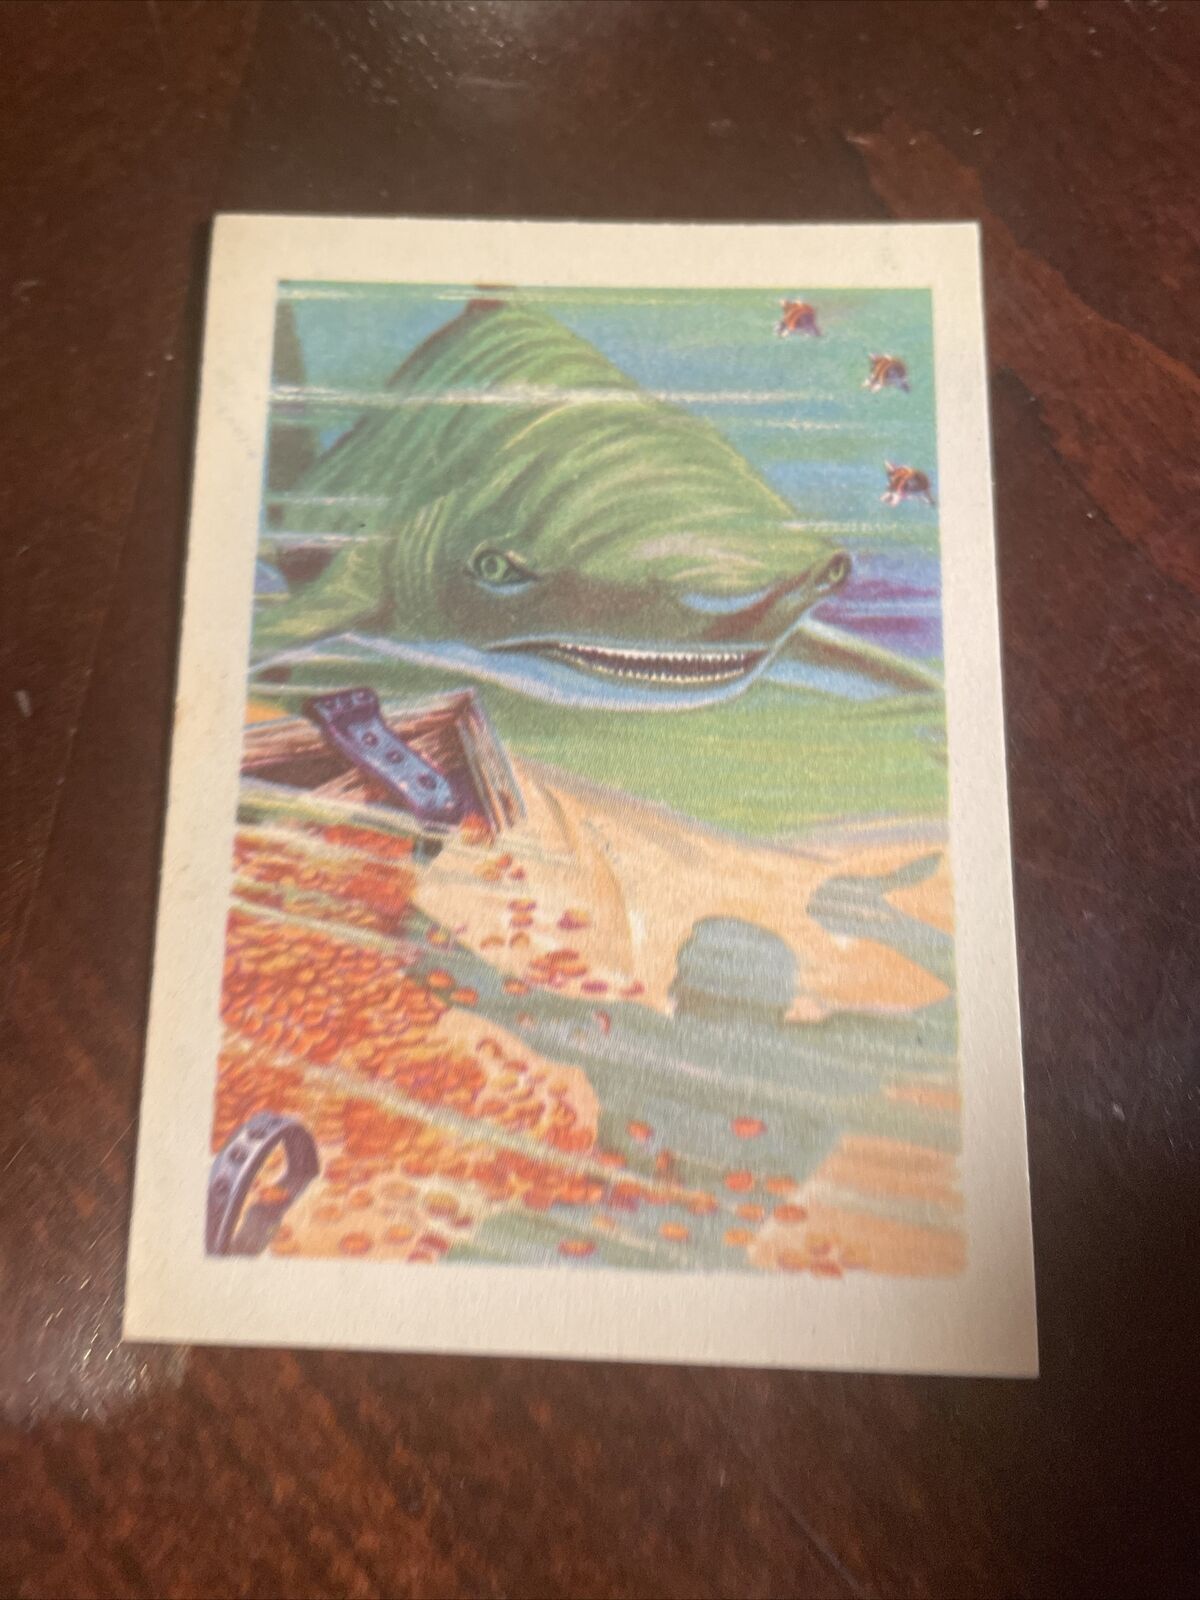 1956 ADVENTURE CARD #1 - AT THE END OF THE RAINBOW - Gum Products, Inc Nm-mt